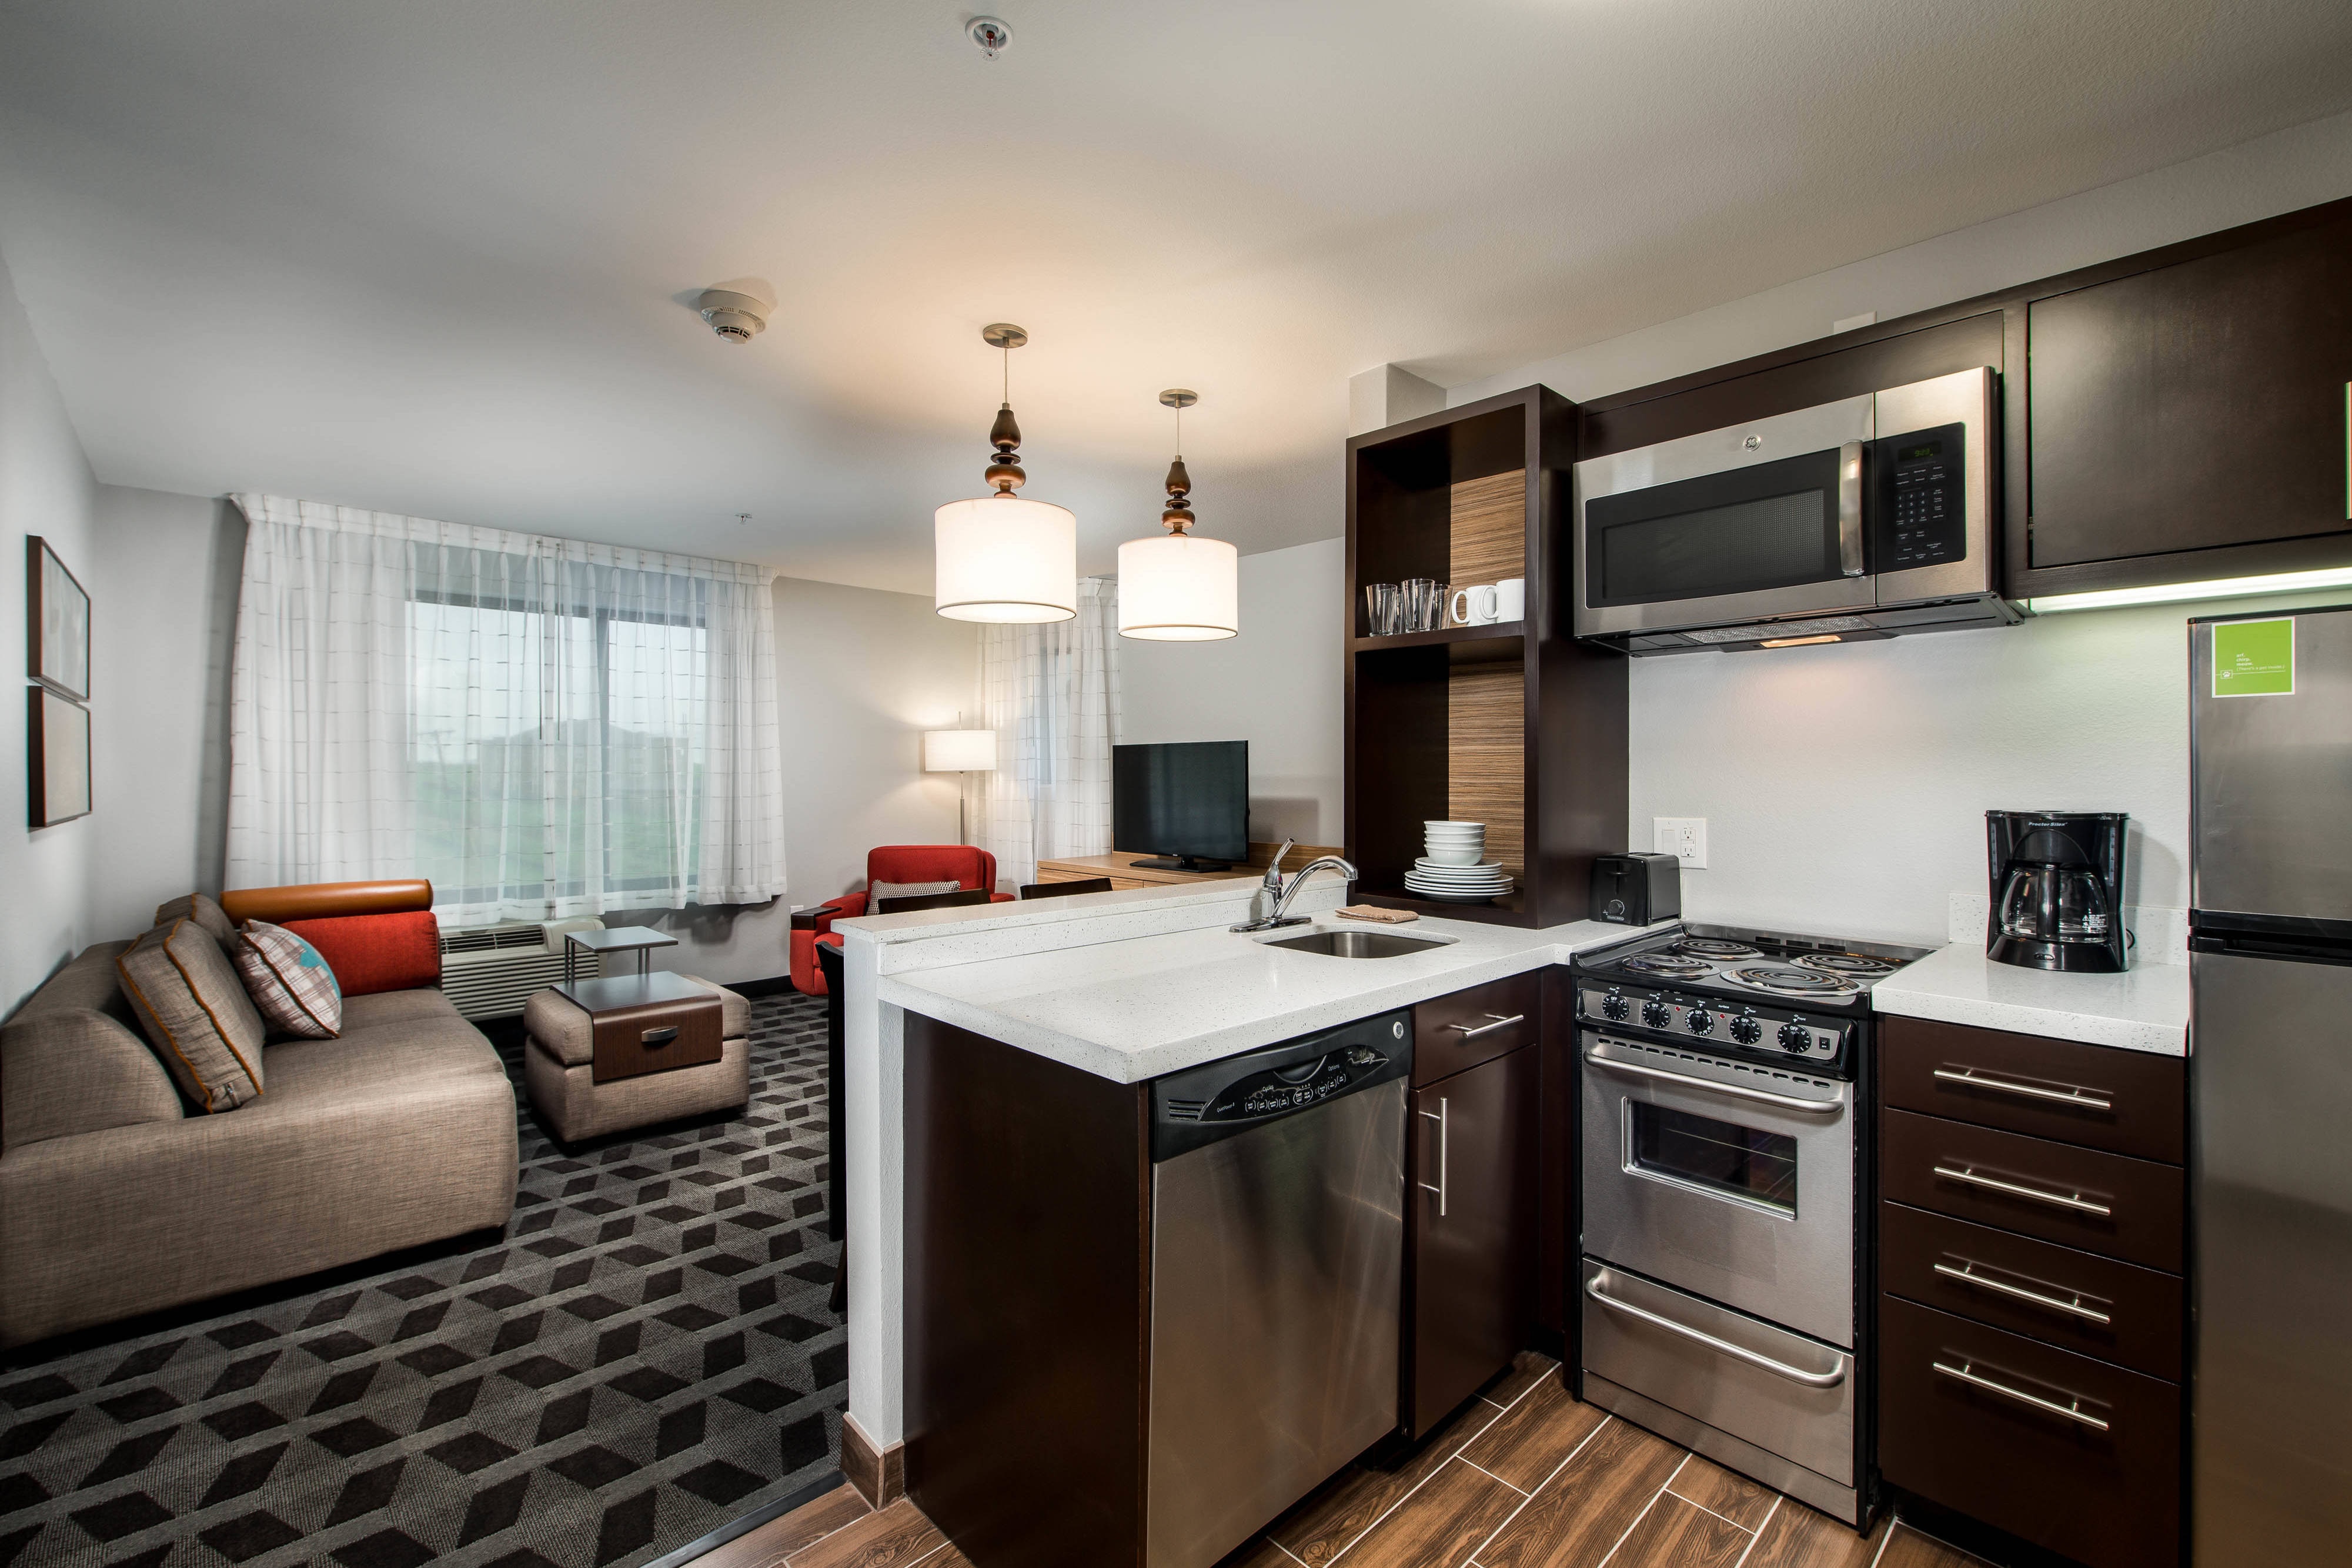 TownePlace Suites Waco South hotel amenities | Hotel room ...